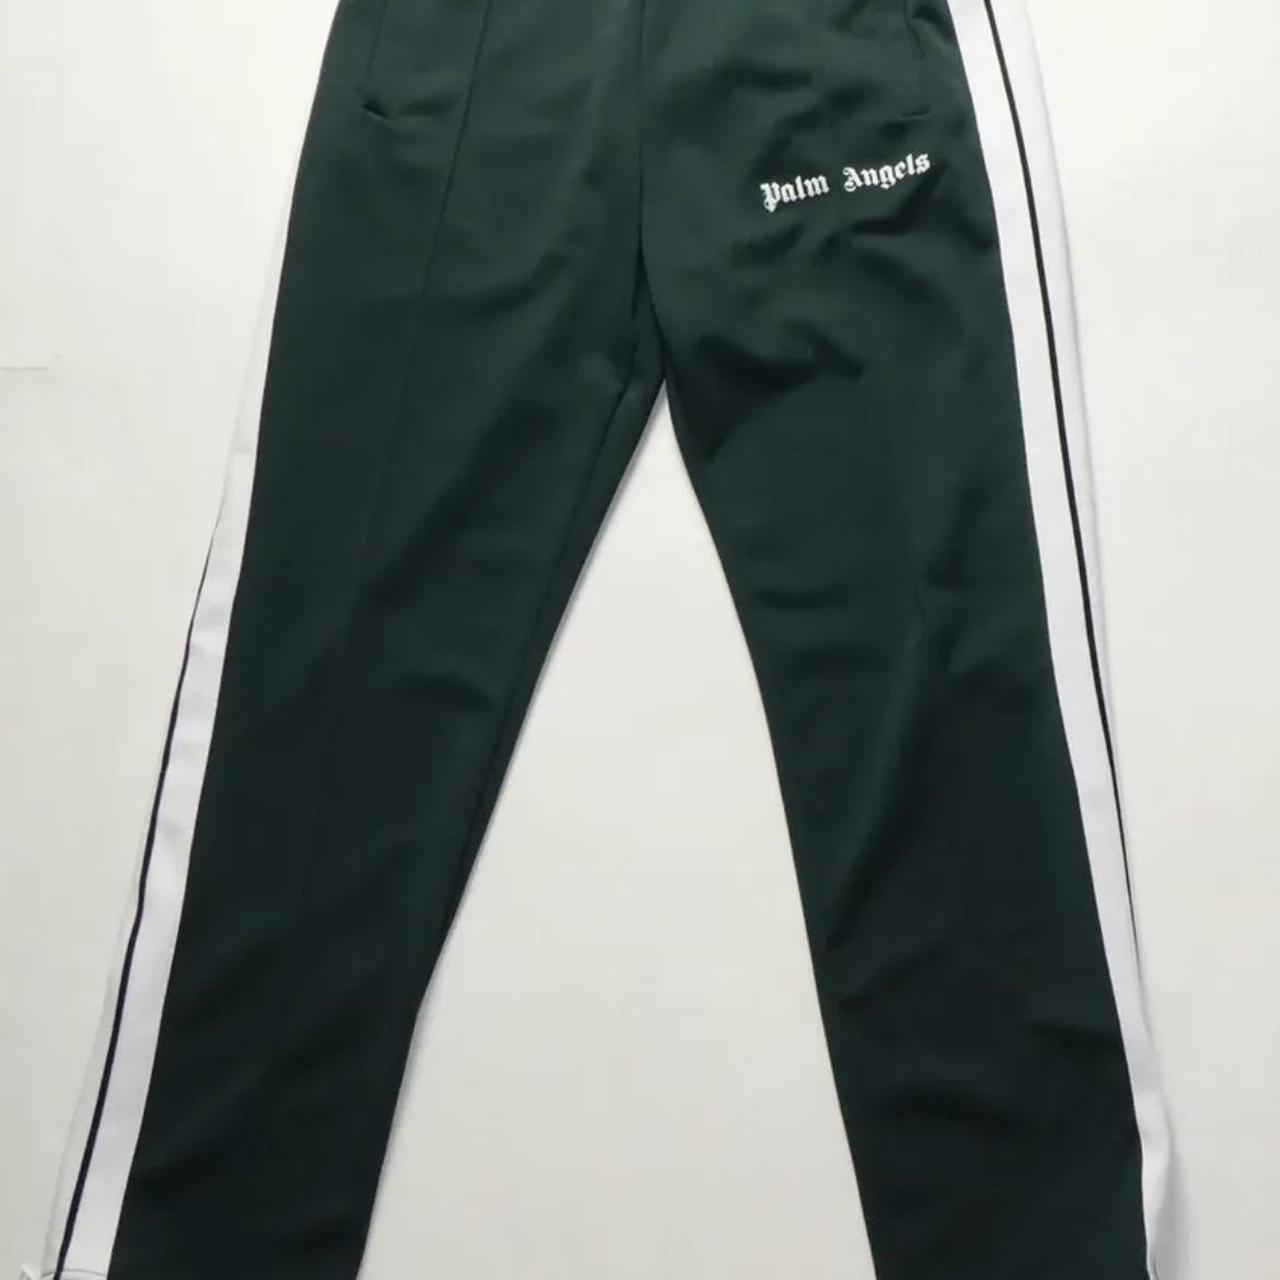 Palm angles track pants, size S Brand new, not... - Depop